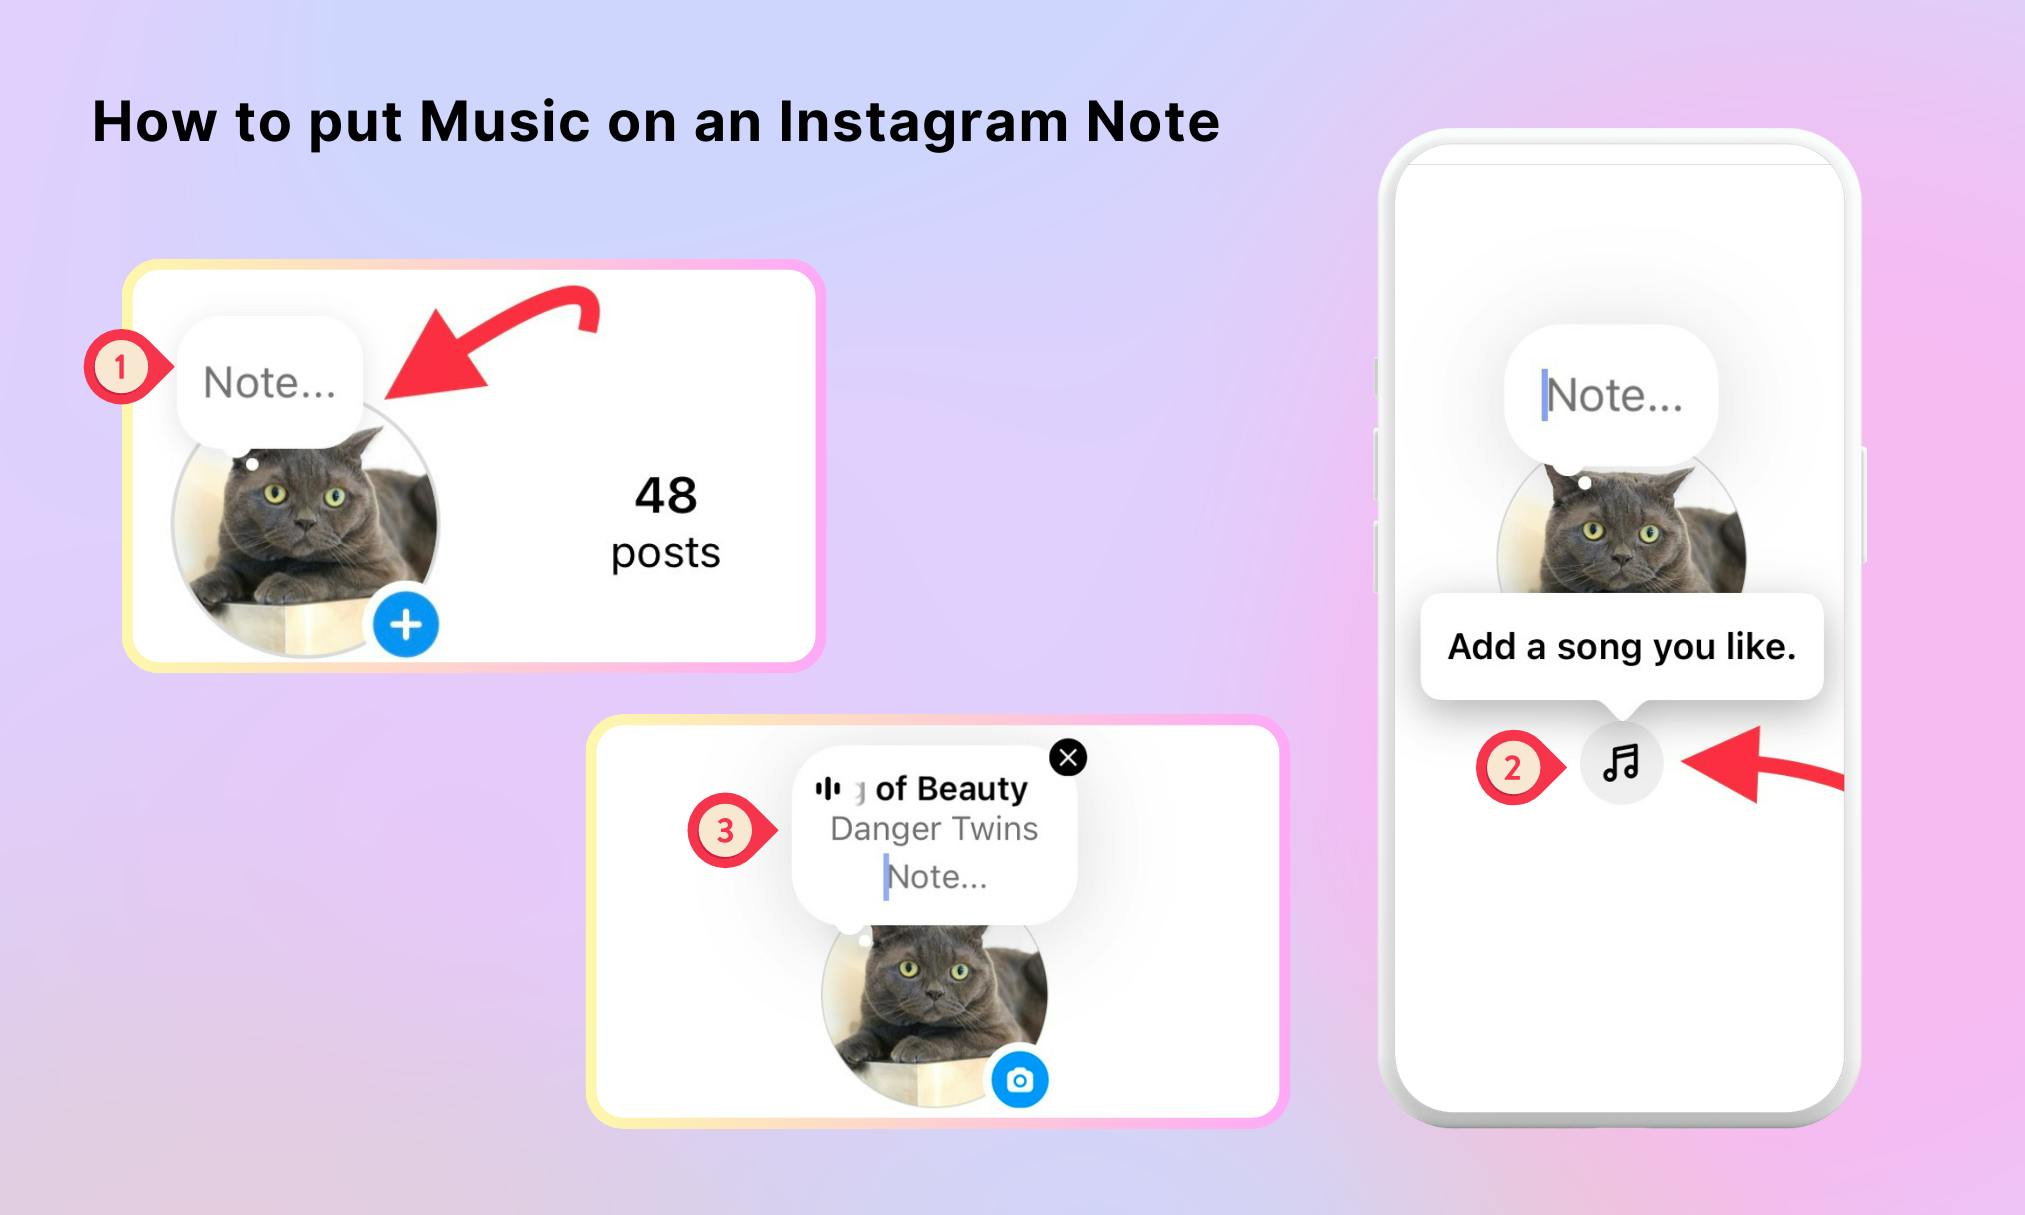 How to add music on an Instagram Note